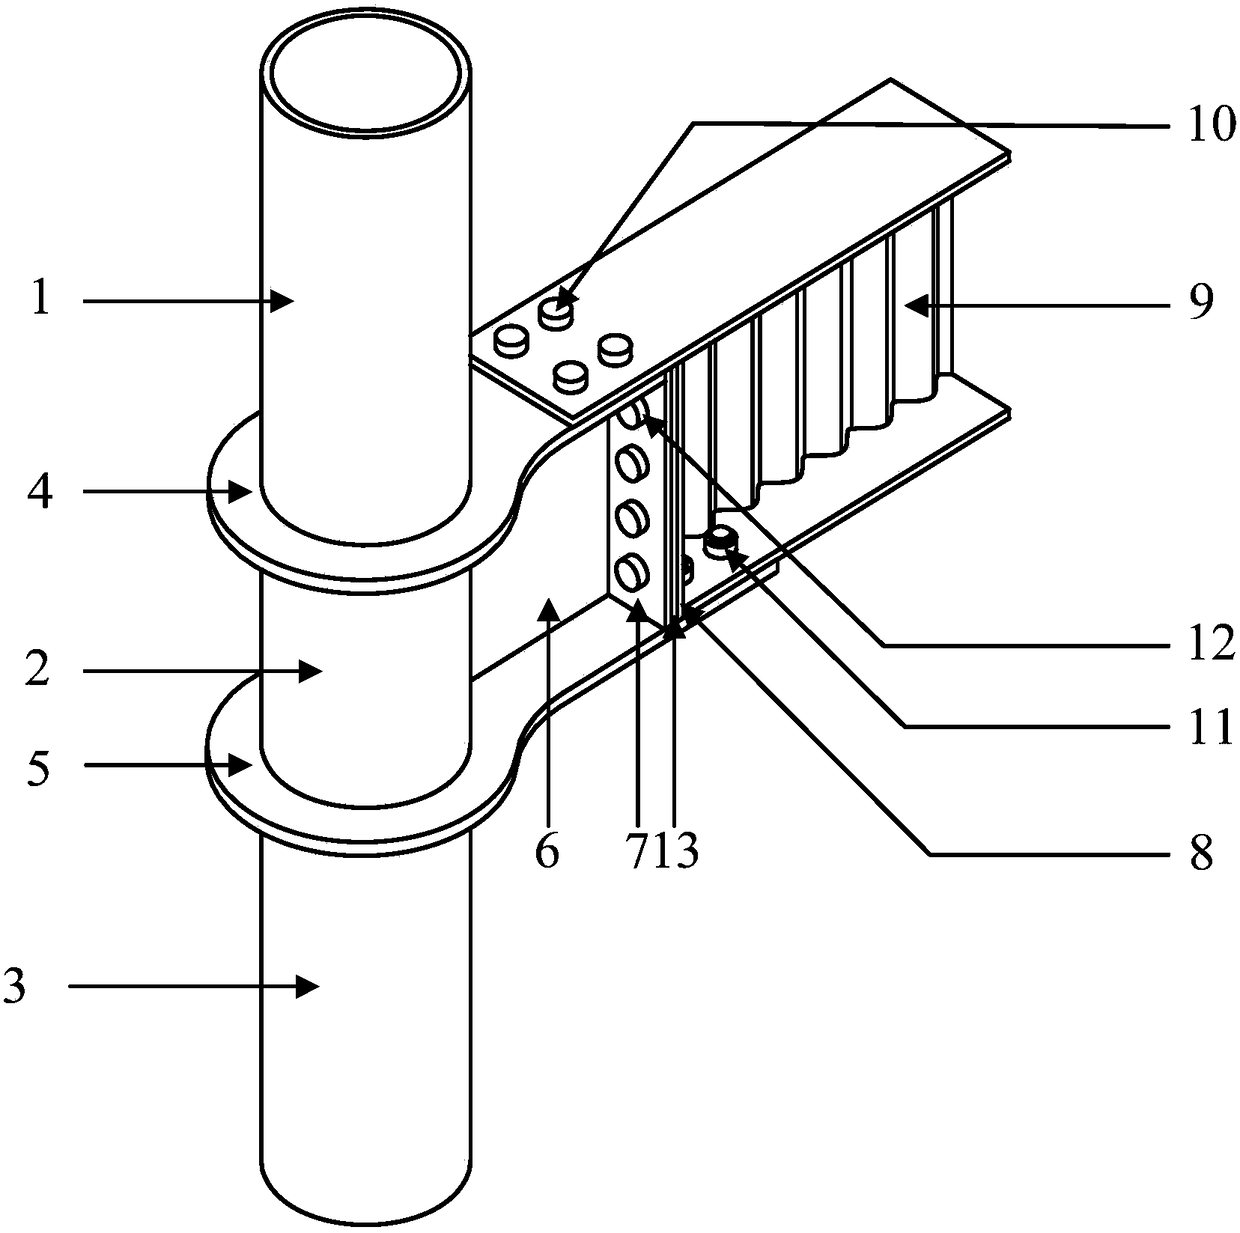 An assembled wave-web beam-column joint connection device